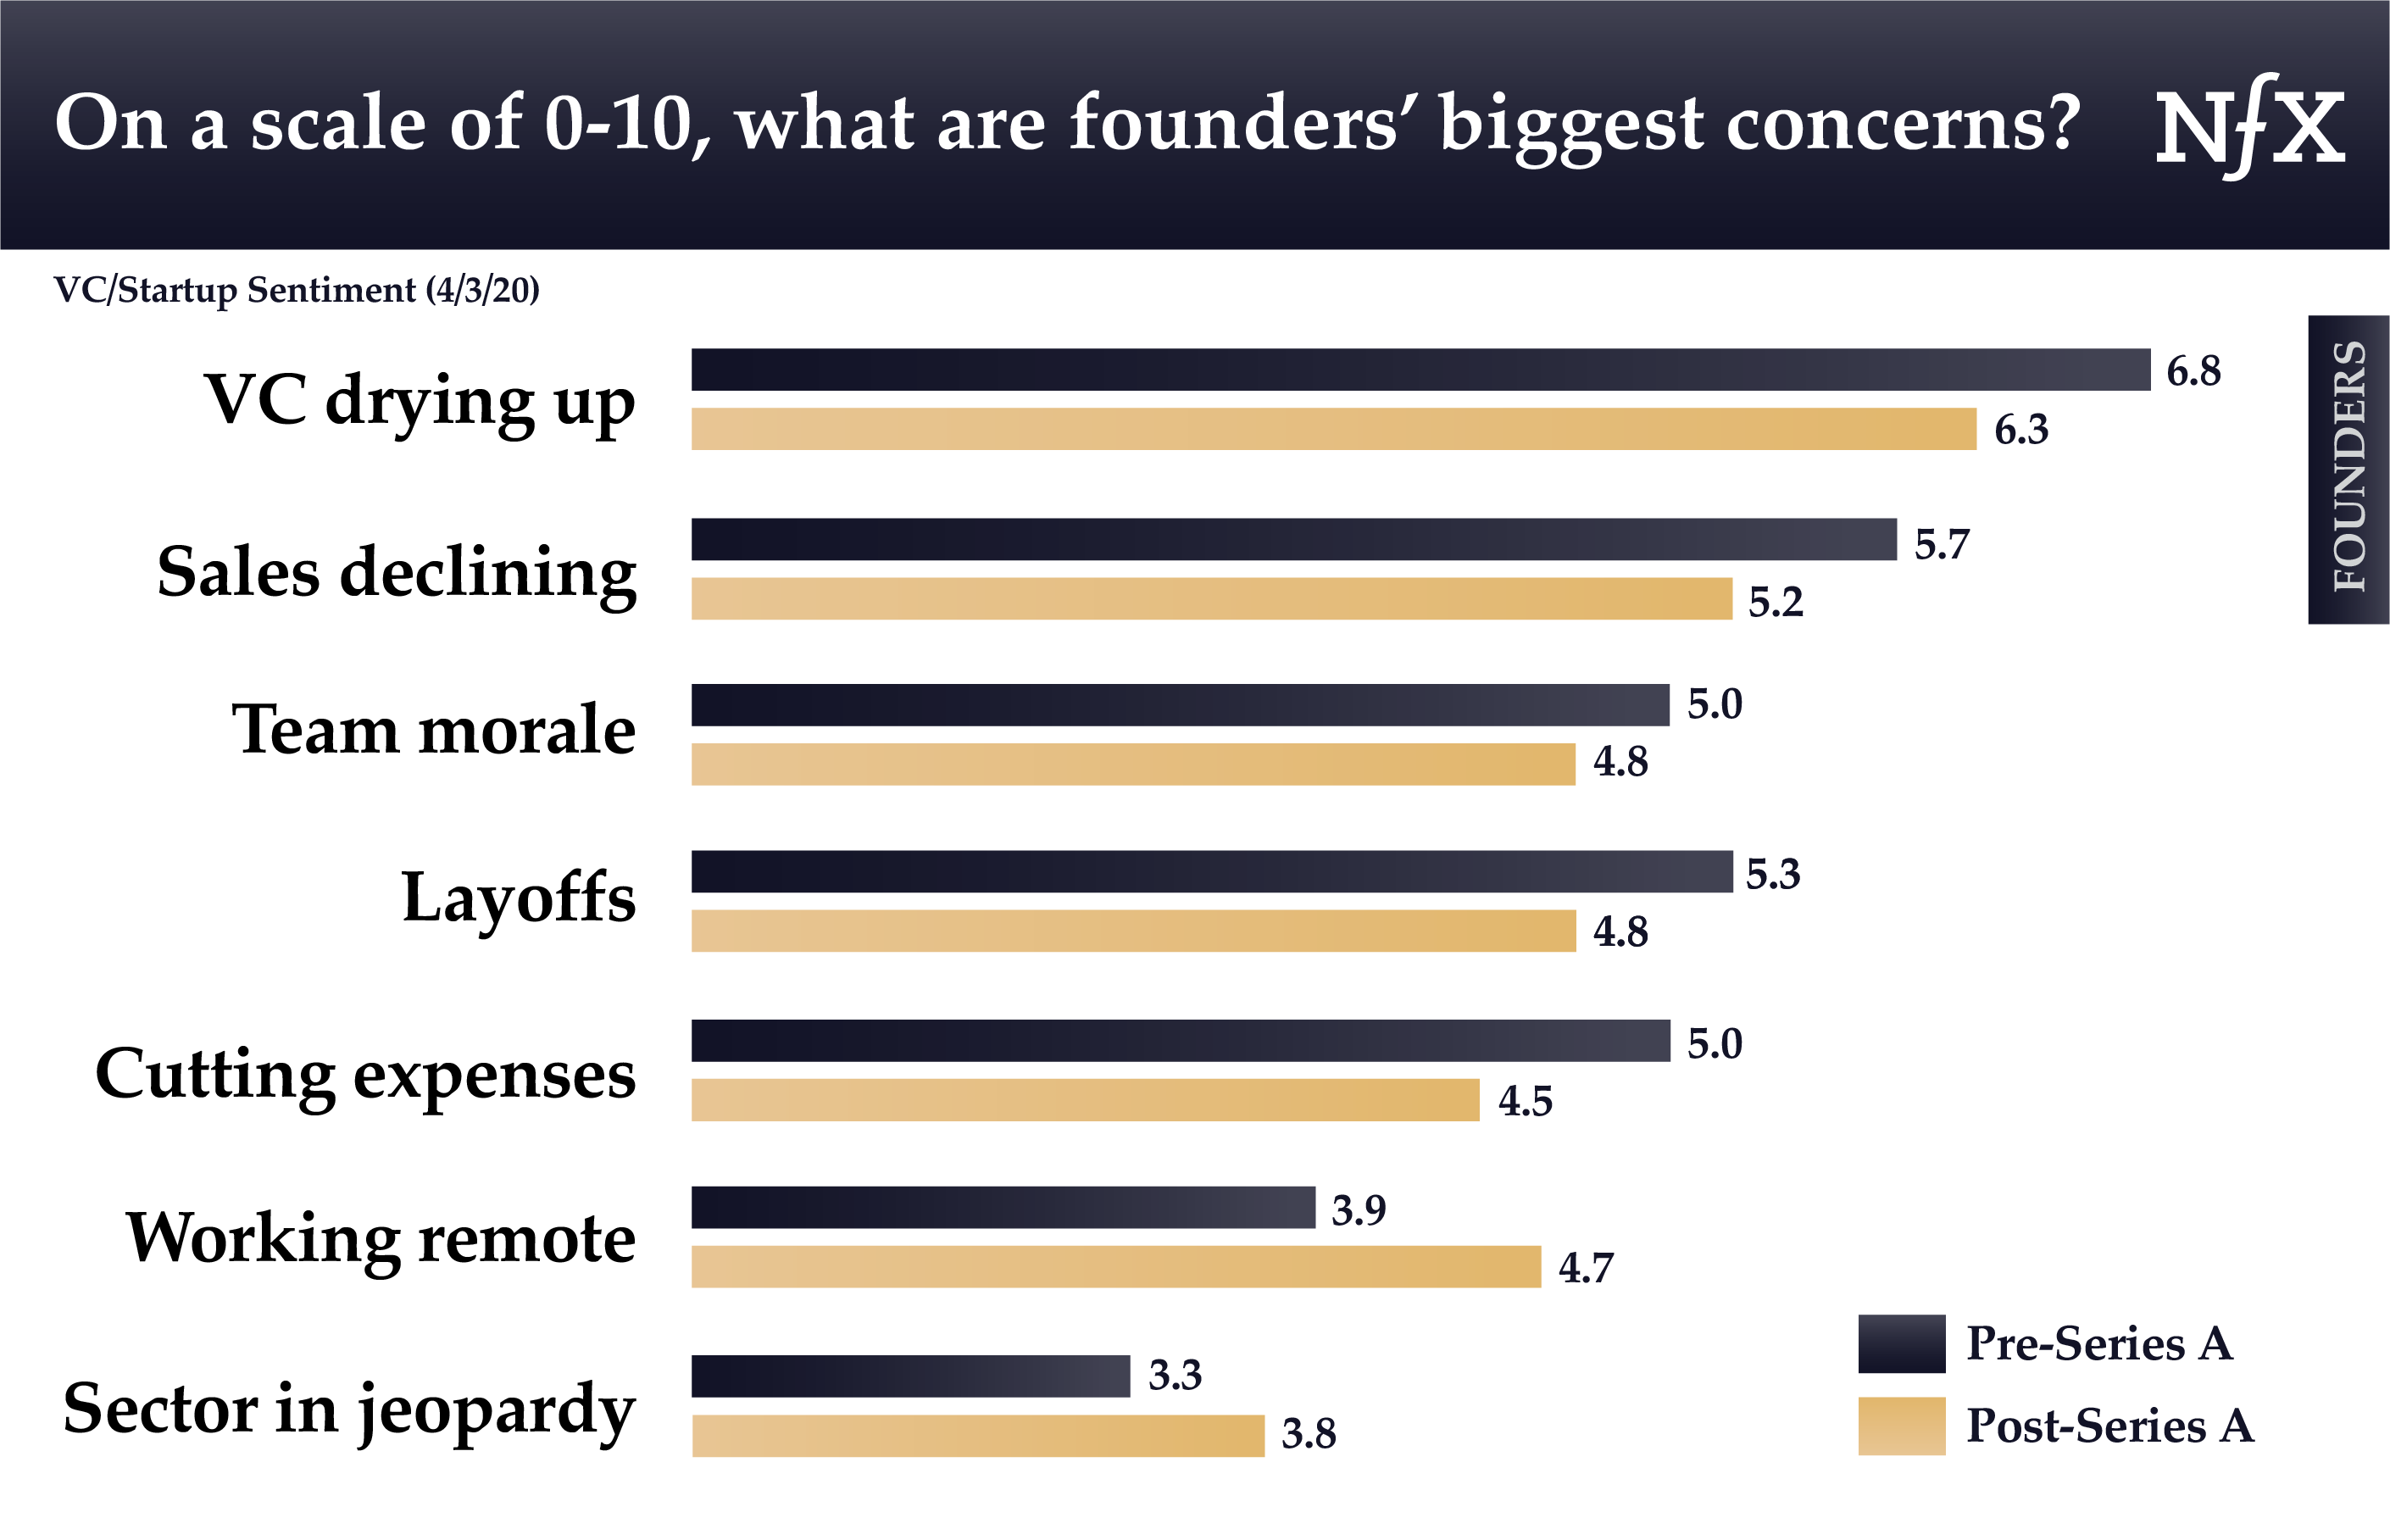 On scale 0-10, what are founders' biggest concerns during COVID-19?